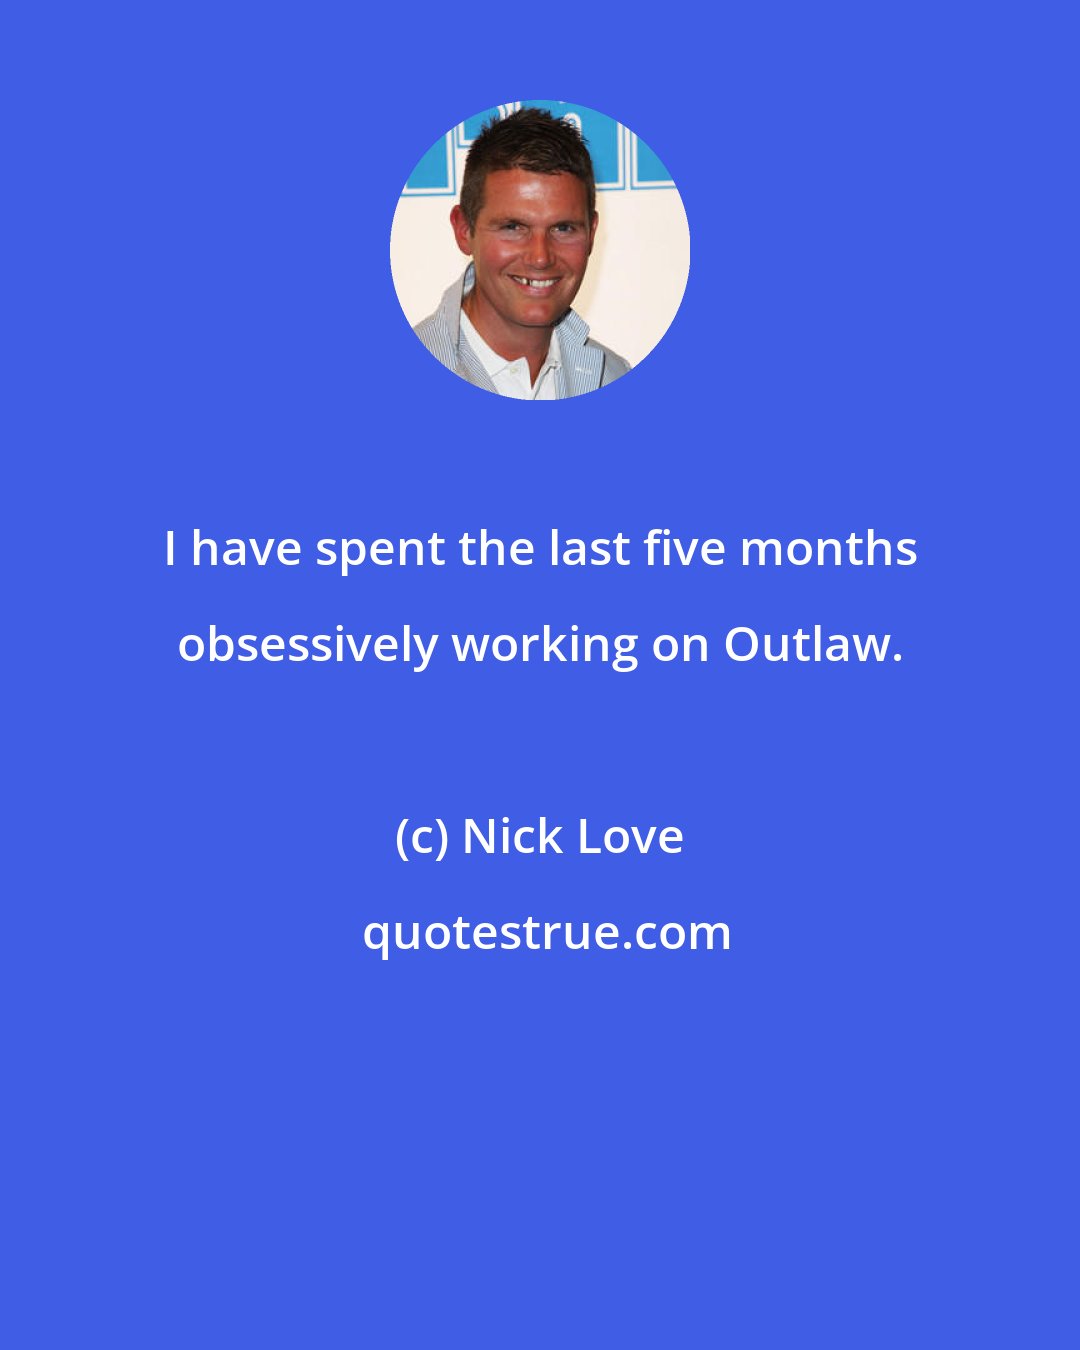 Nick Love: I have spent the last five months obsessively working on Outlaw.